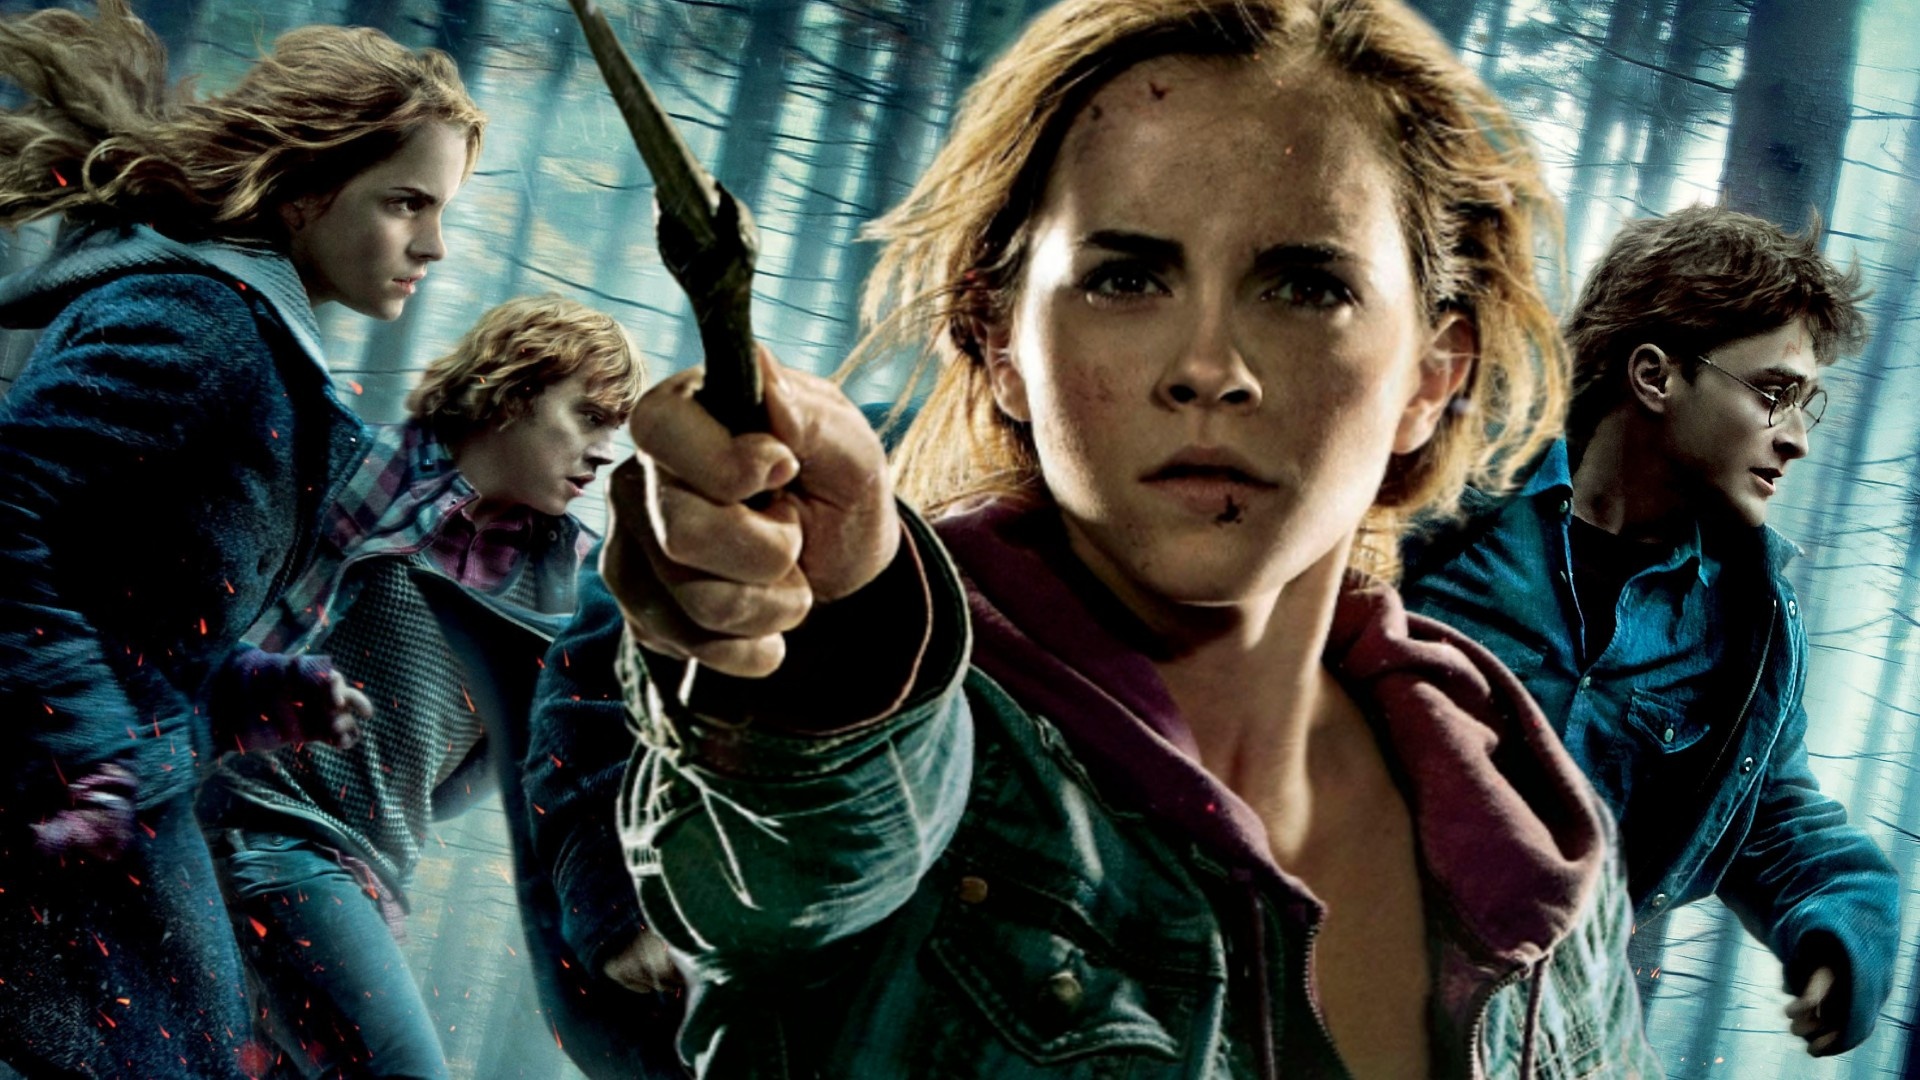 An Easter Egg Fans Wonder If The Deathly Hallows Will Appear